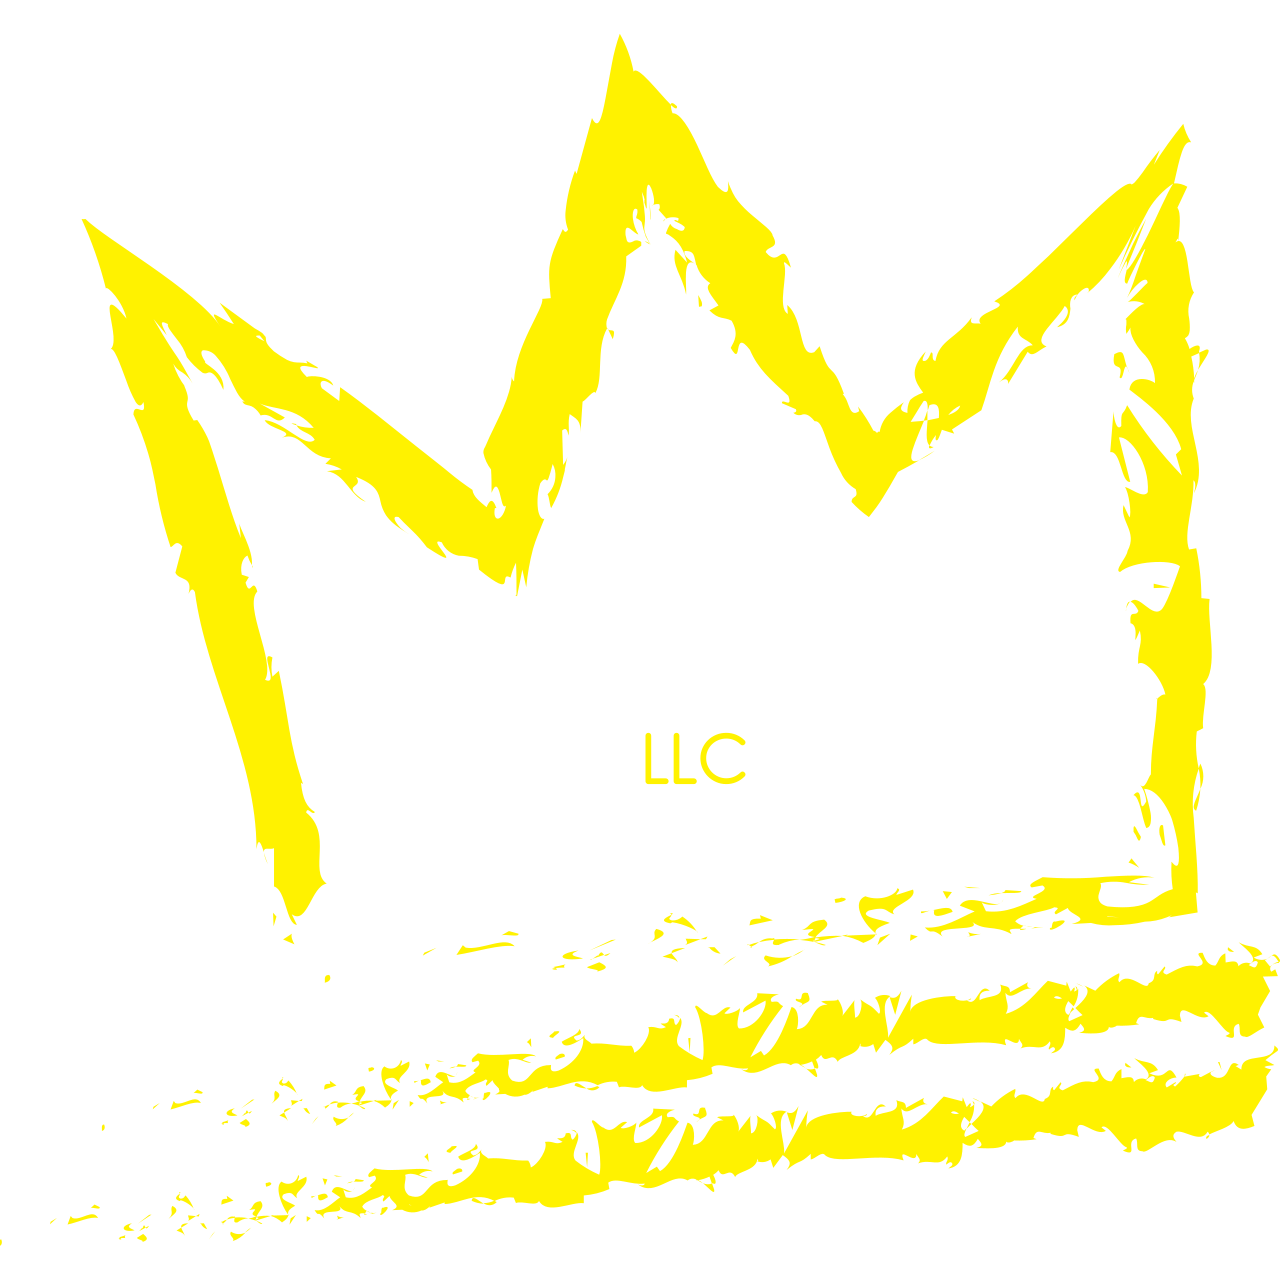 King Movers's logo